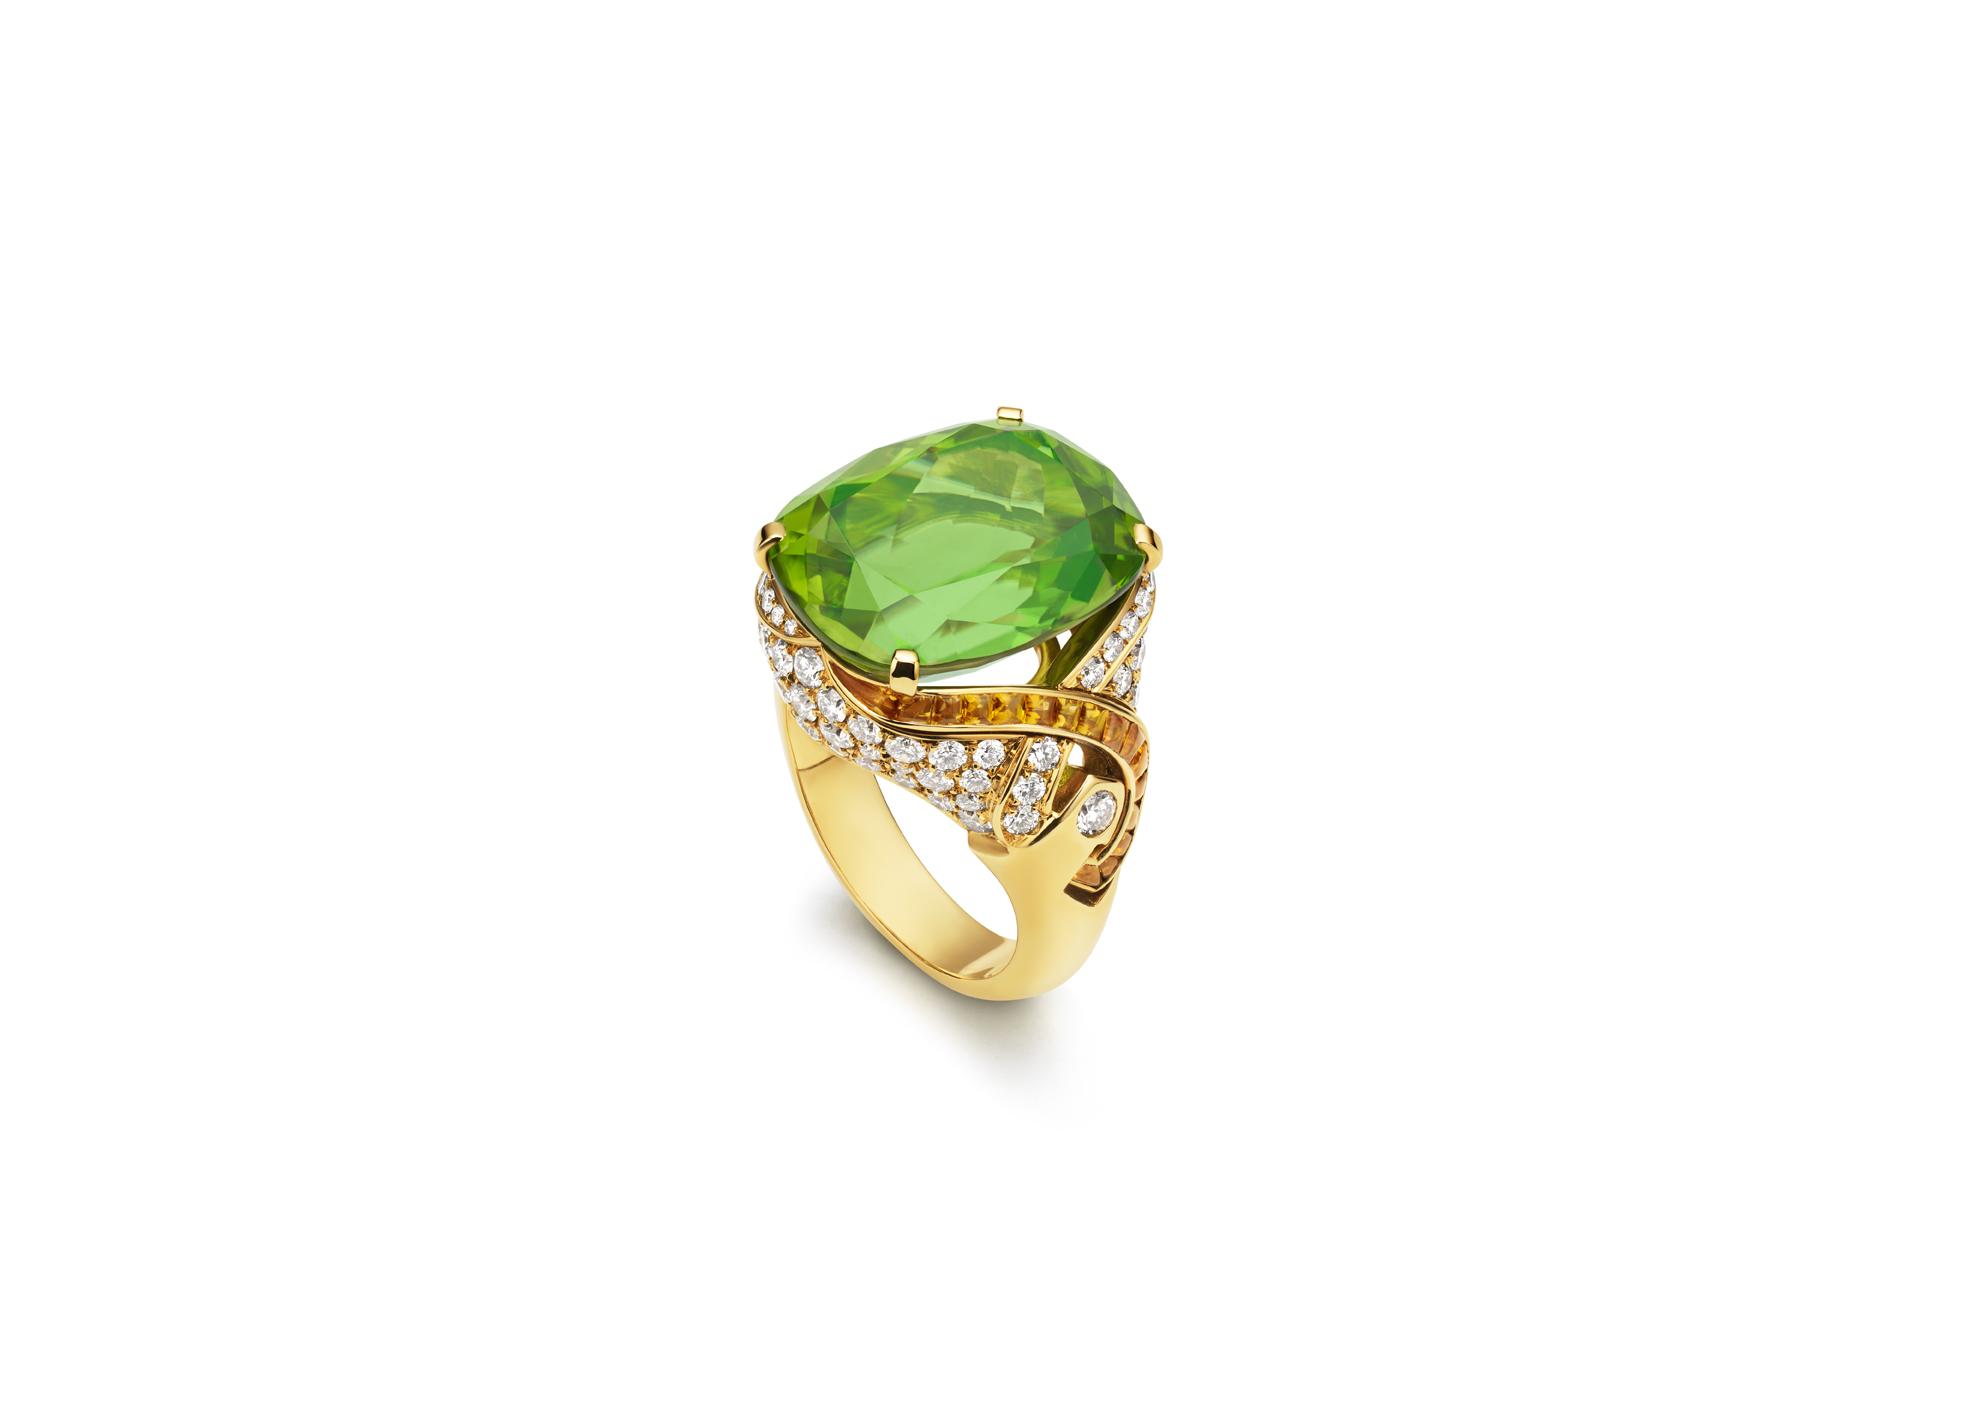 COLOR TREASURES RING IN YELLOW GOLD WITH A PERIDOT BY BVLGARI